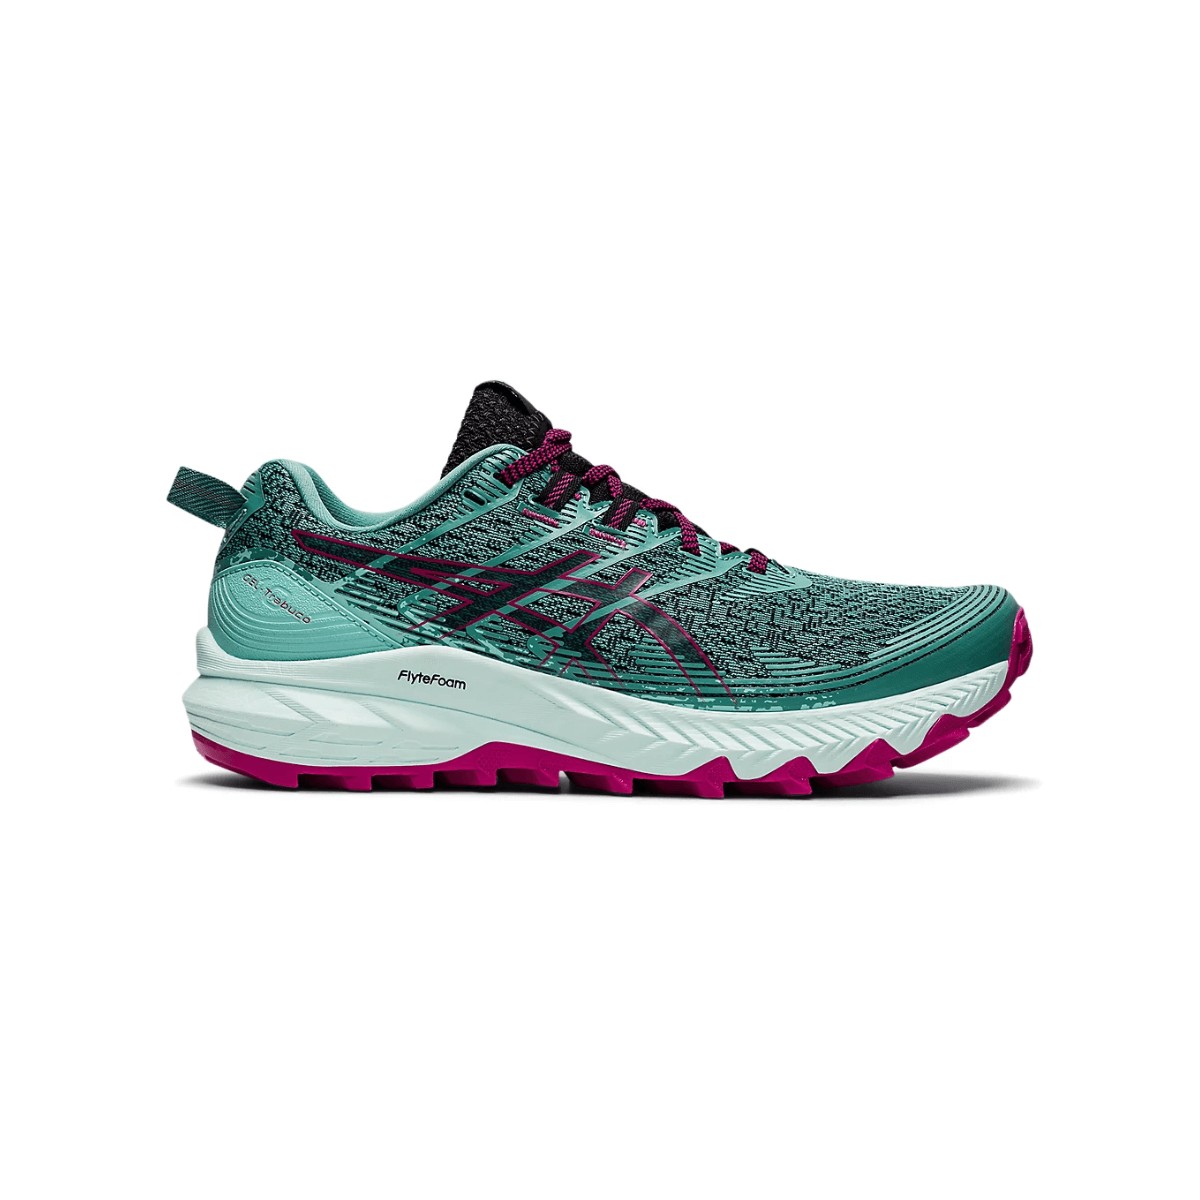 Chaussures Asics Gel Trabuco 10 Turquoise Violet Femmes AW22, Taille 39,5 - EUR